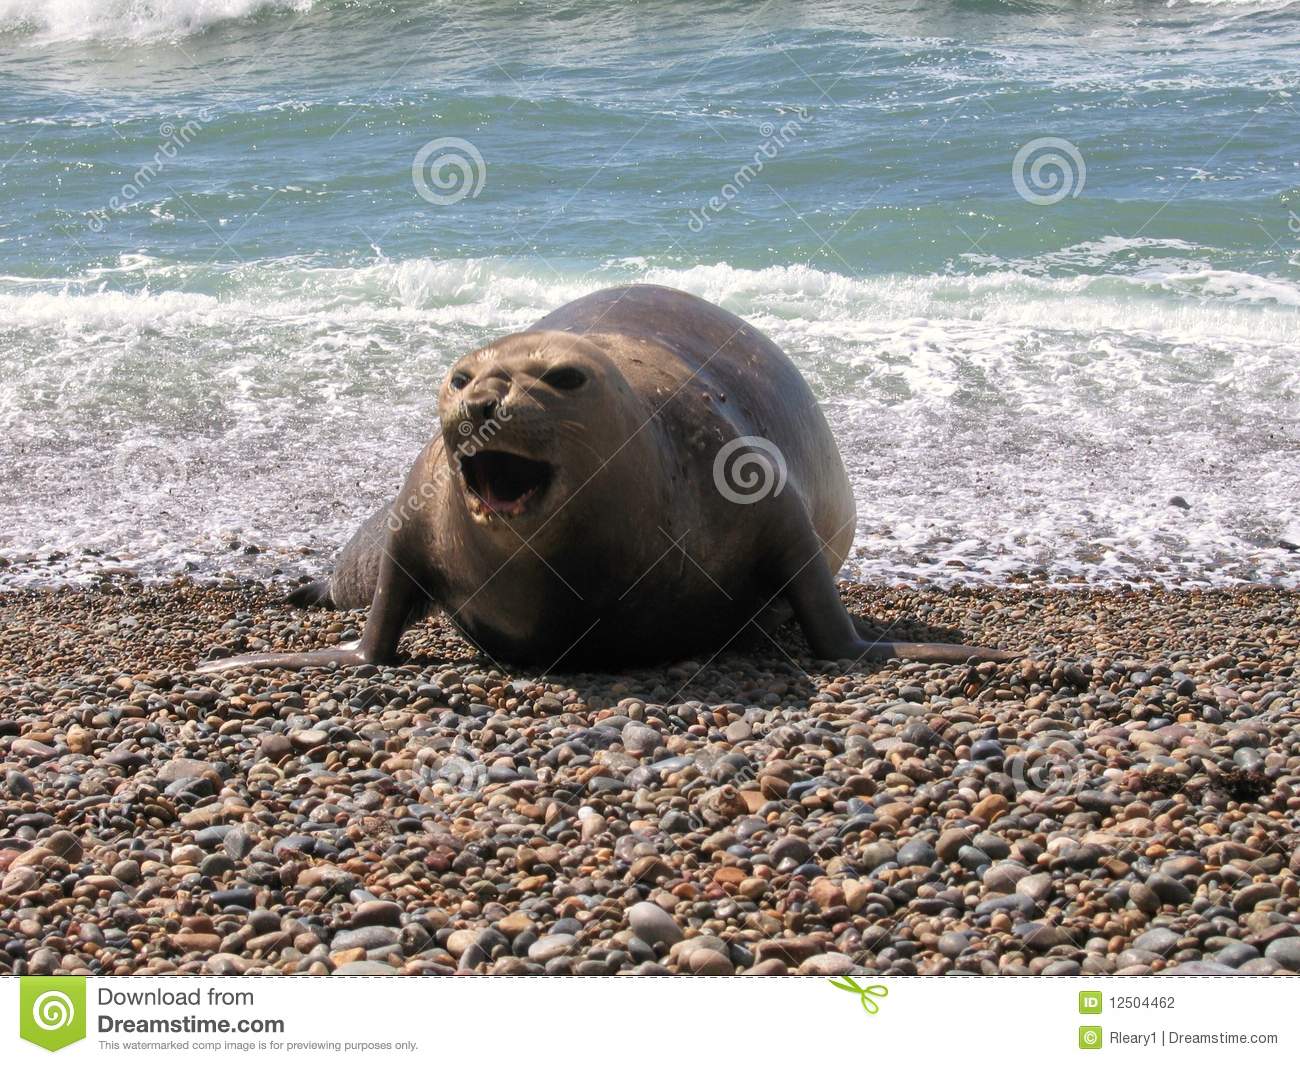 Sea Elephant Emerging From The Sea In Puerto Madryn In Argentina